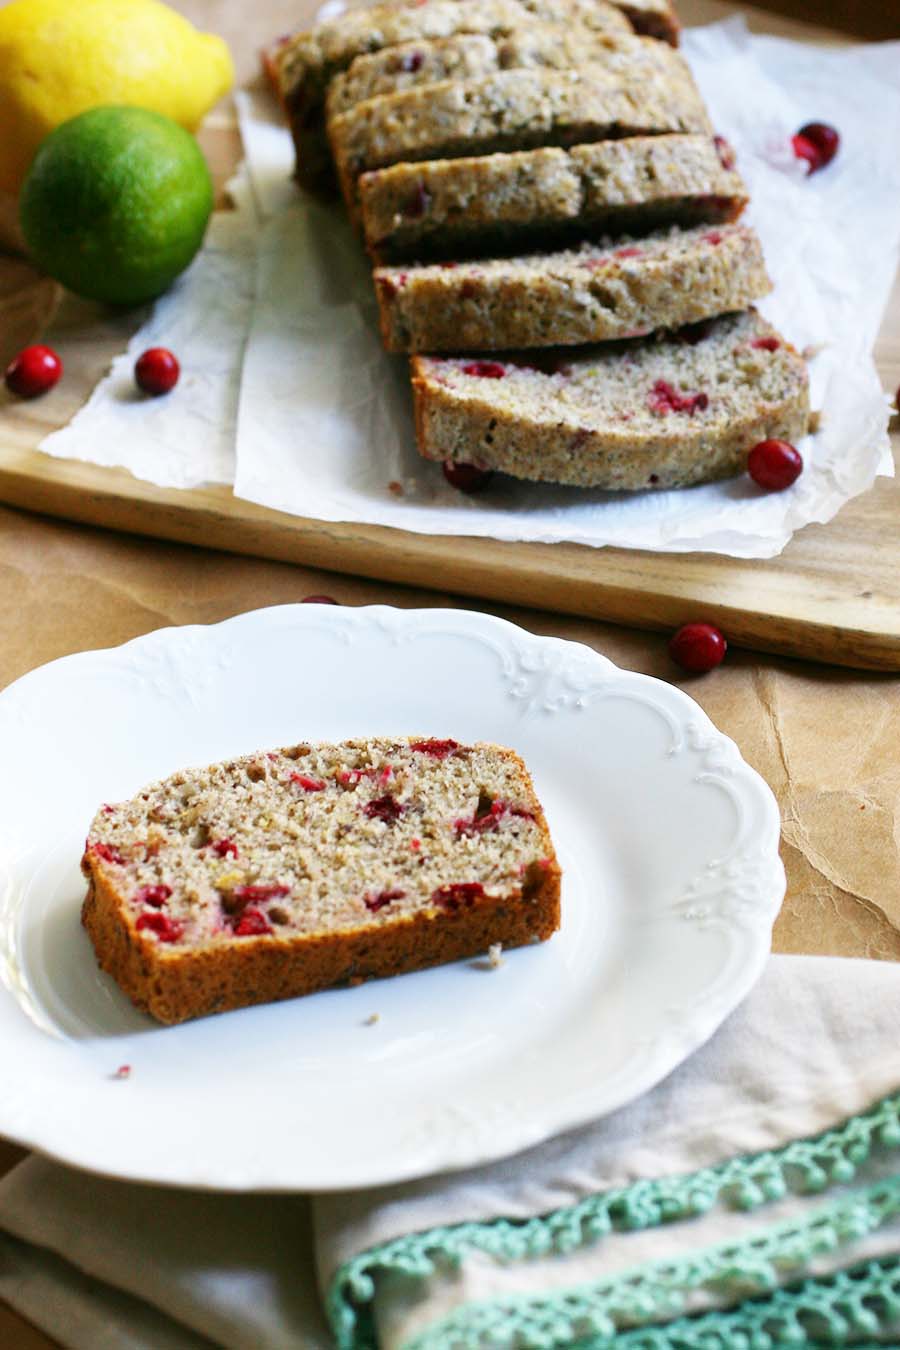 A loaf of quick bread sitting on parchment paper on top of a wooden table with lemons, limes, and cranberries strewn about.